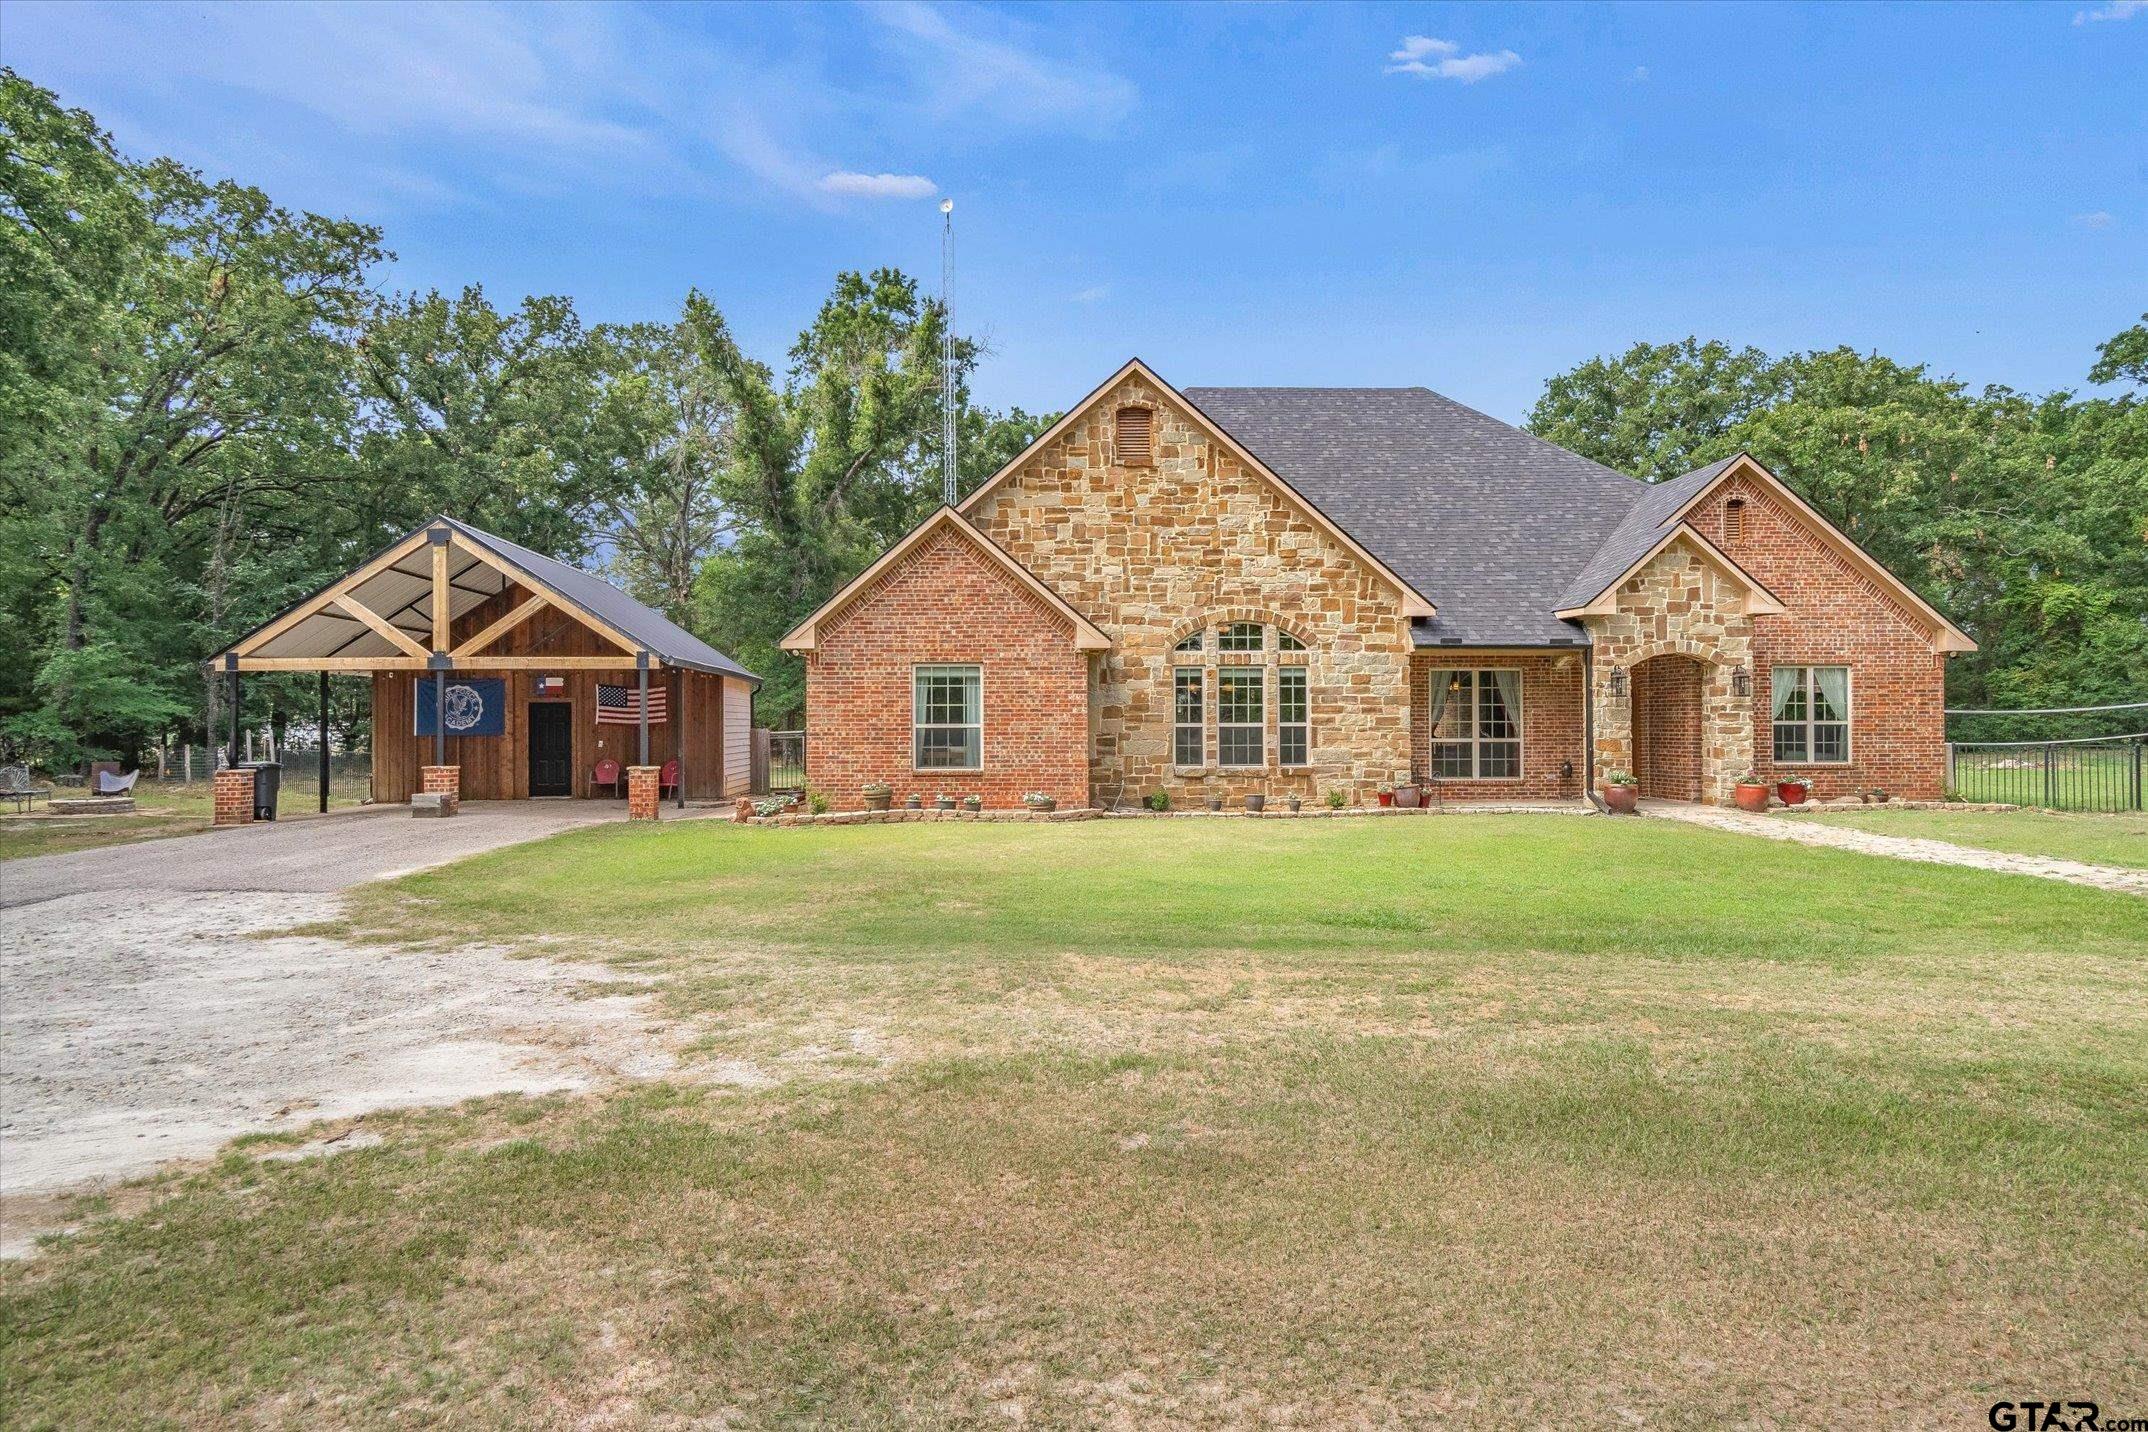 591 VZ County Road 3213, Wills Point, Texas 75169, 5 Bedrooms Bedrooms, ,3 BathroomsBathrooms,Single Family Detached,For Sale,VZ County Road 3213,10151733